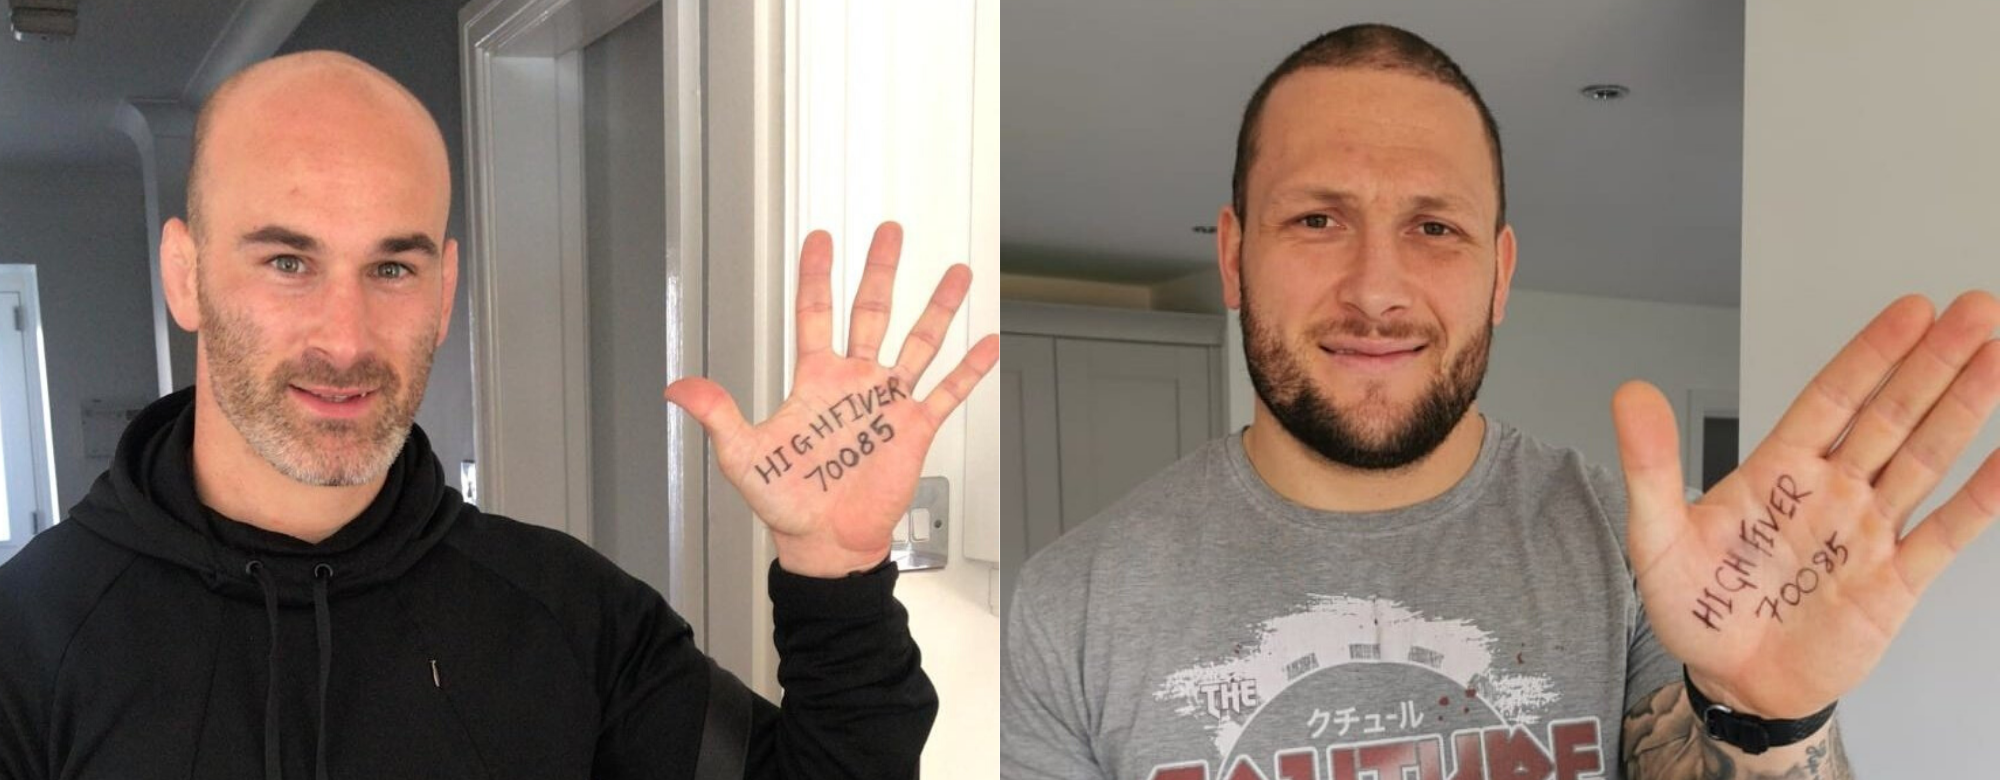 Hull FC Supporting Smile Foundation’s ‘#HighFiver’ Campaign